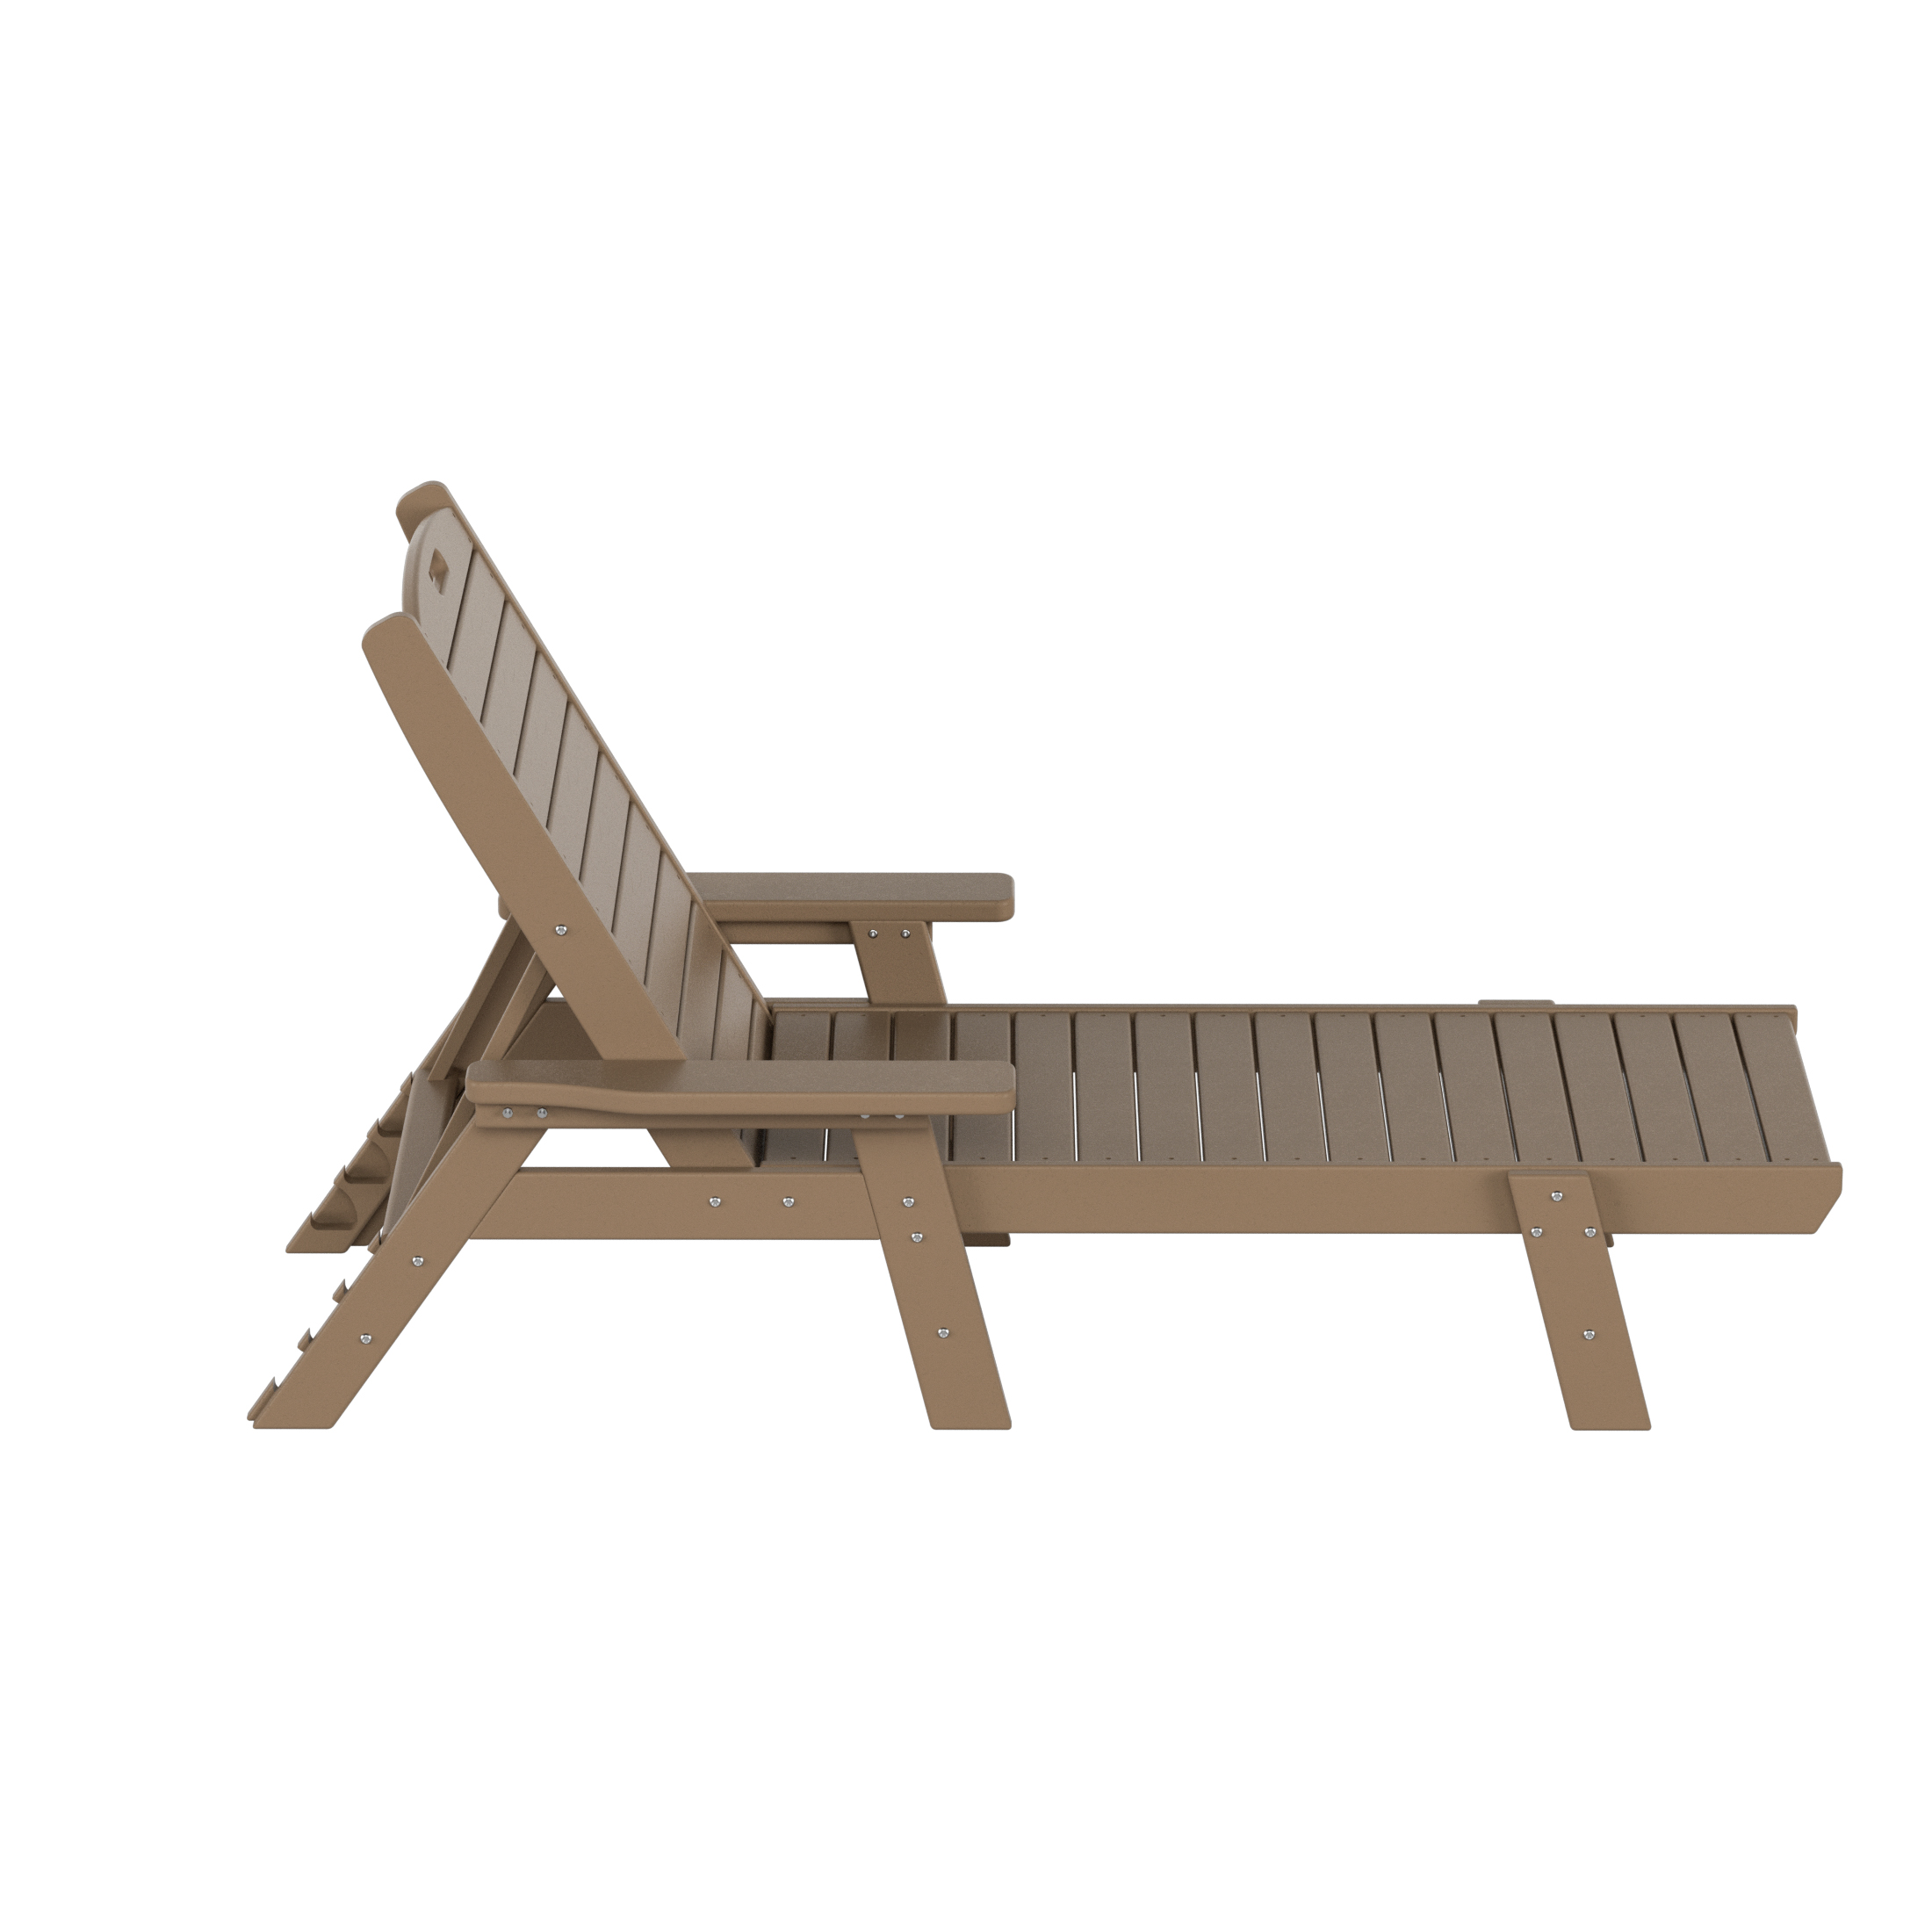 GARDEN Set of 2 Patio Outdoor Chaise Lounge Chair, Weathered Wood - image 4 of 8